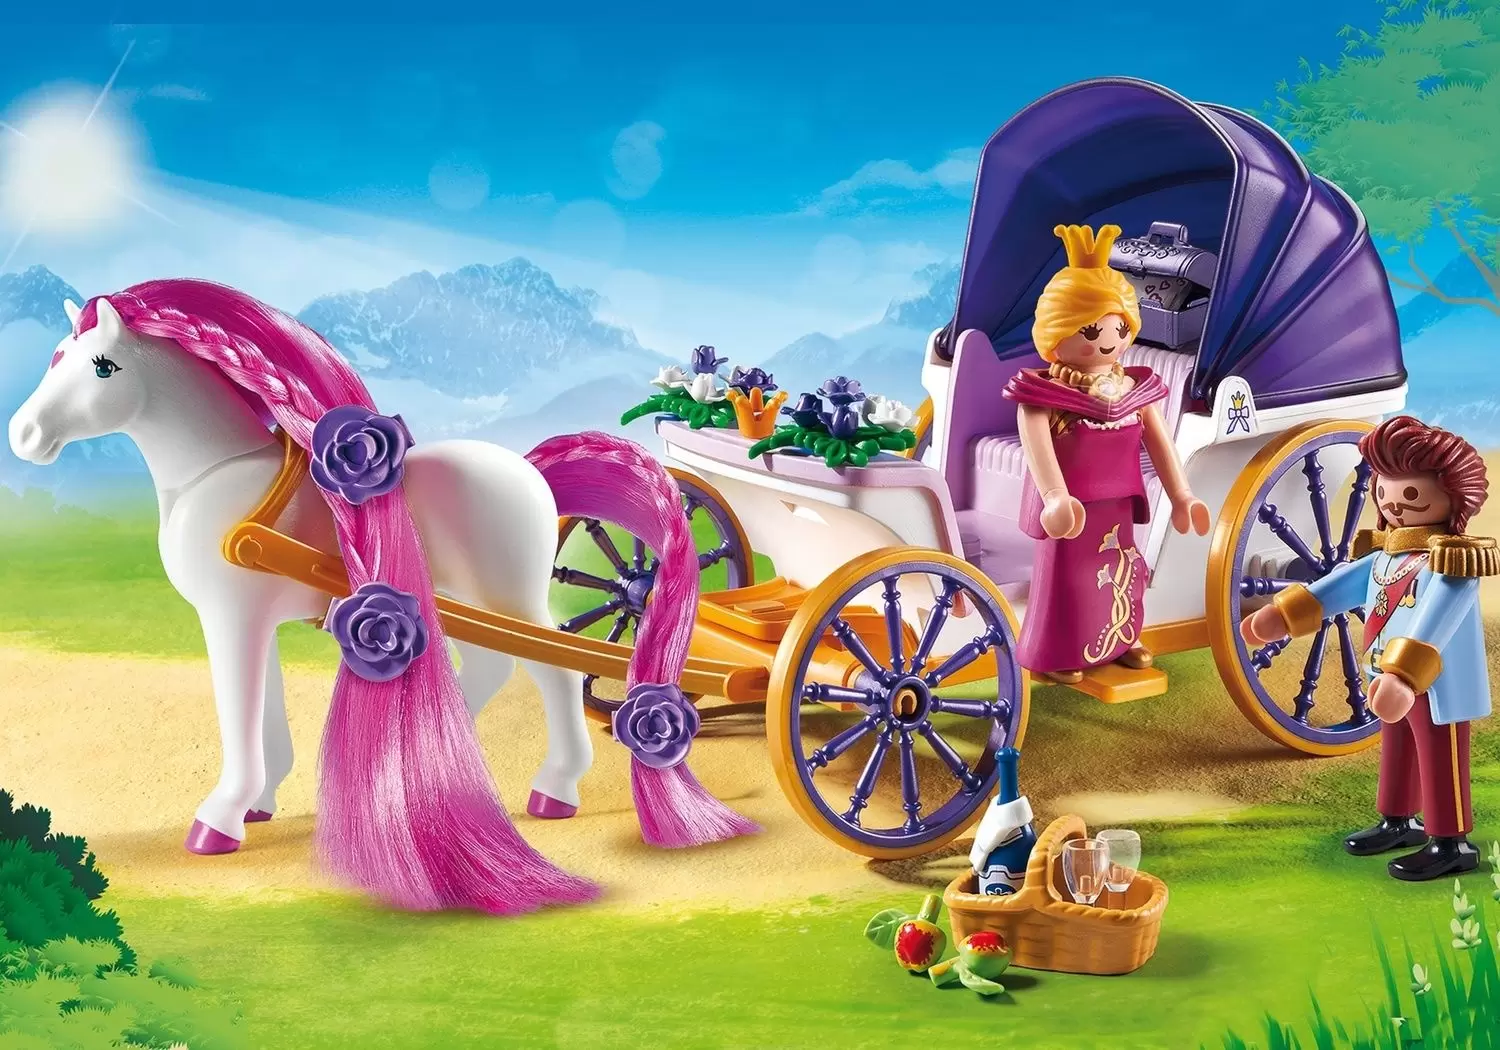 Royal Couple with horse-drawn carriage - Princess 6856